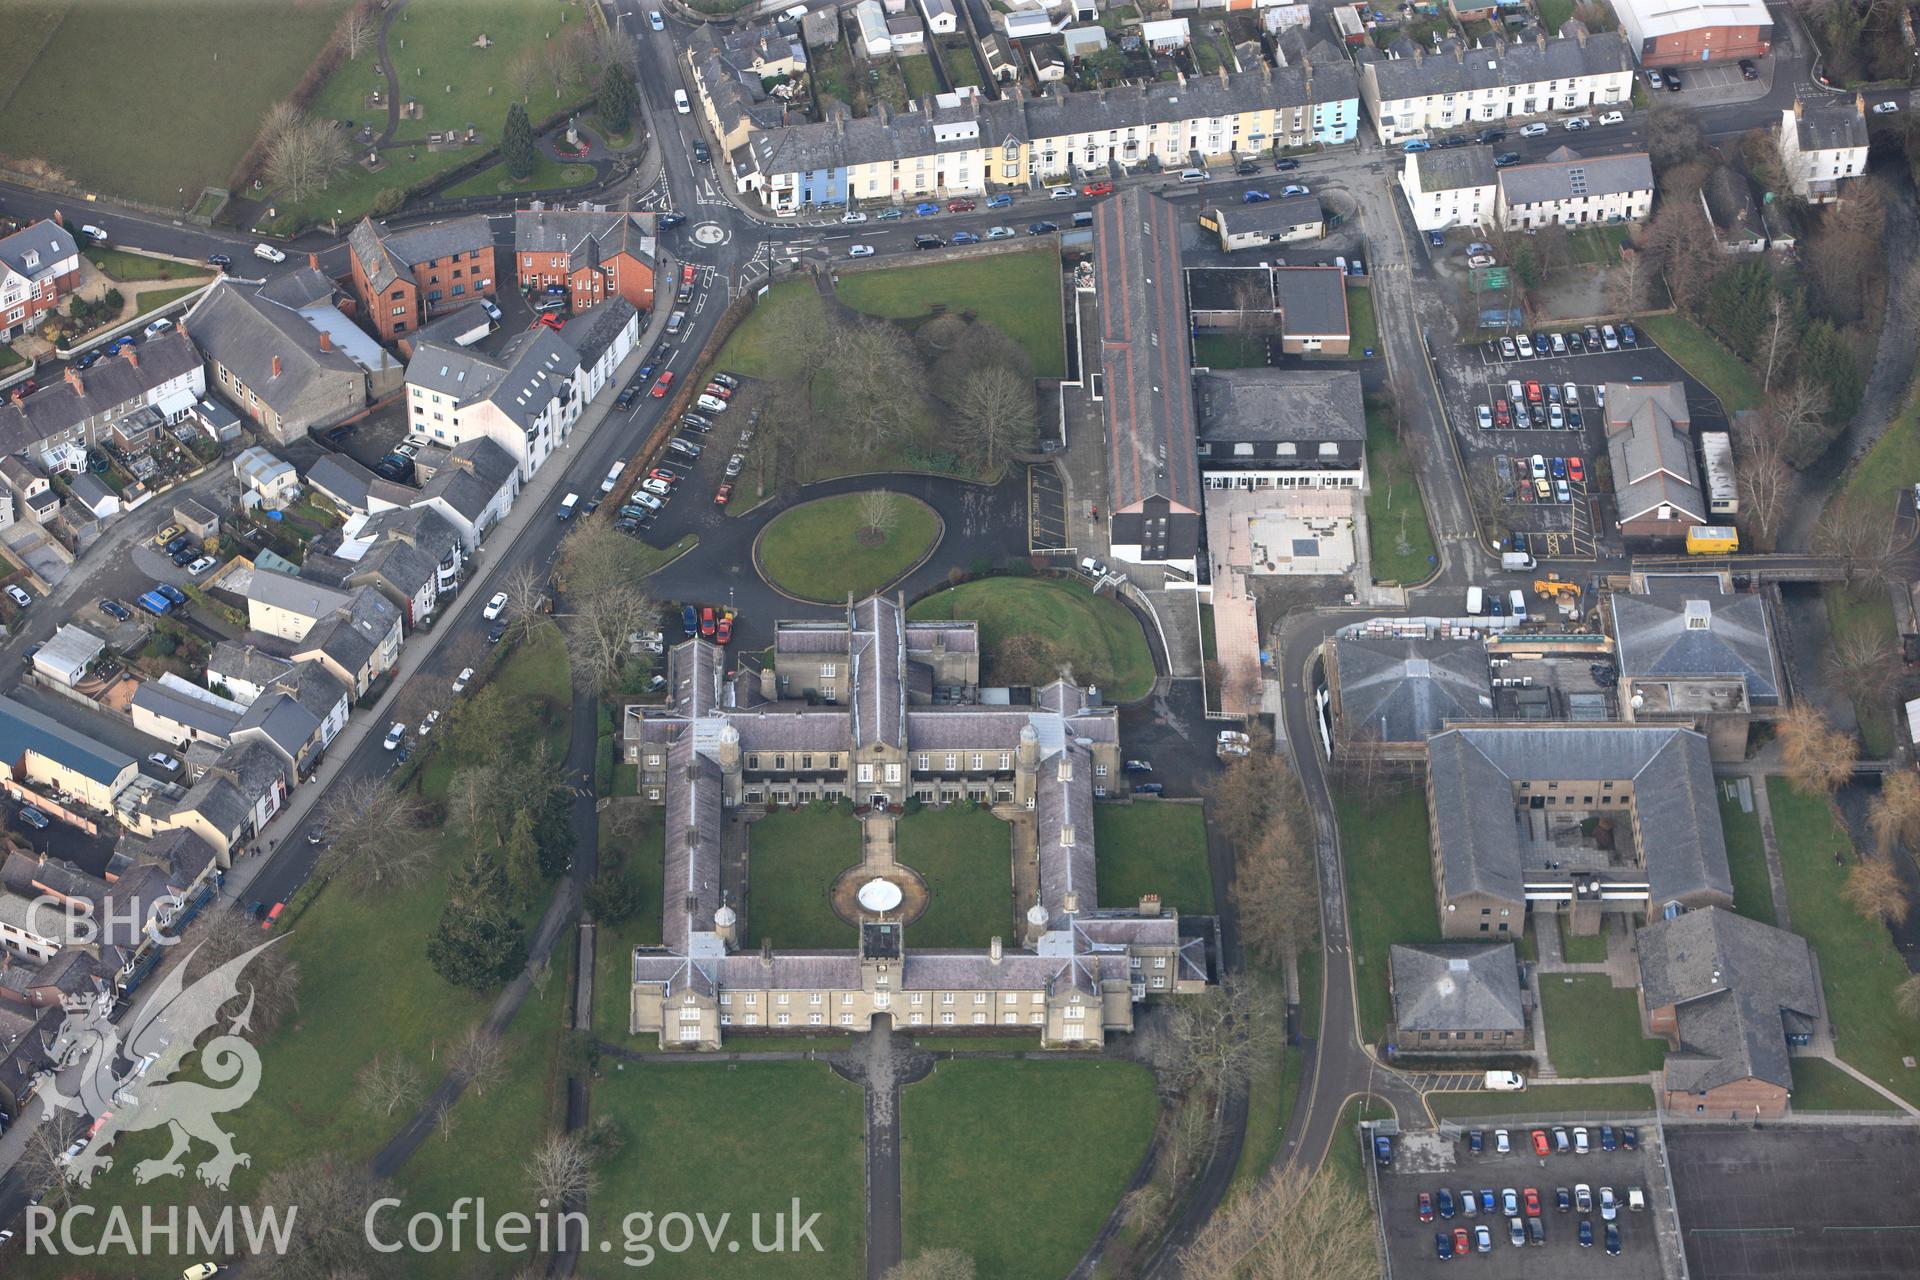 RCAHMW colour oblique photograph of St David's College, University of Wales Lampeter. Taken by Toby Driver on 07/02/2012.